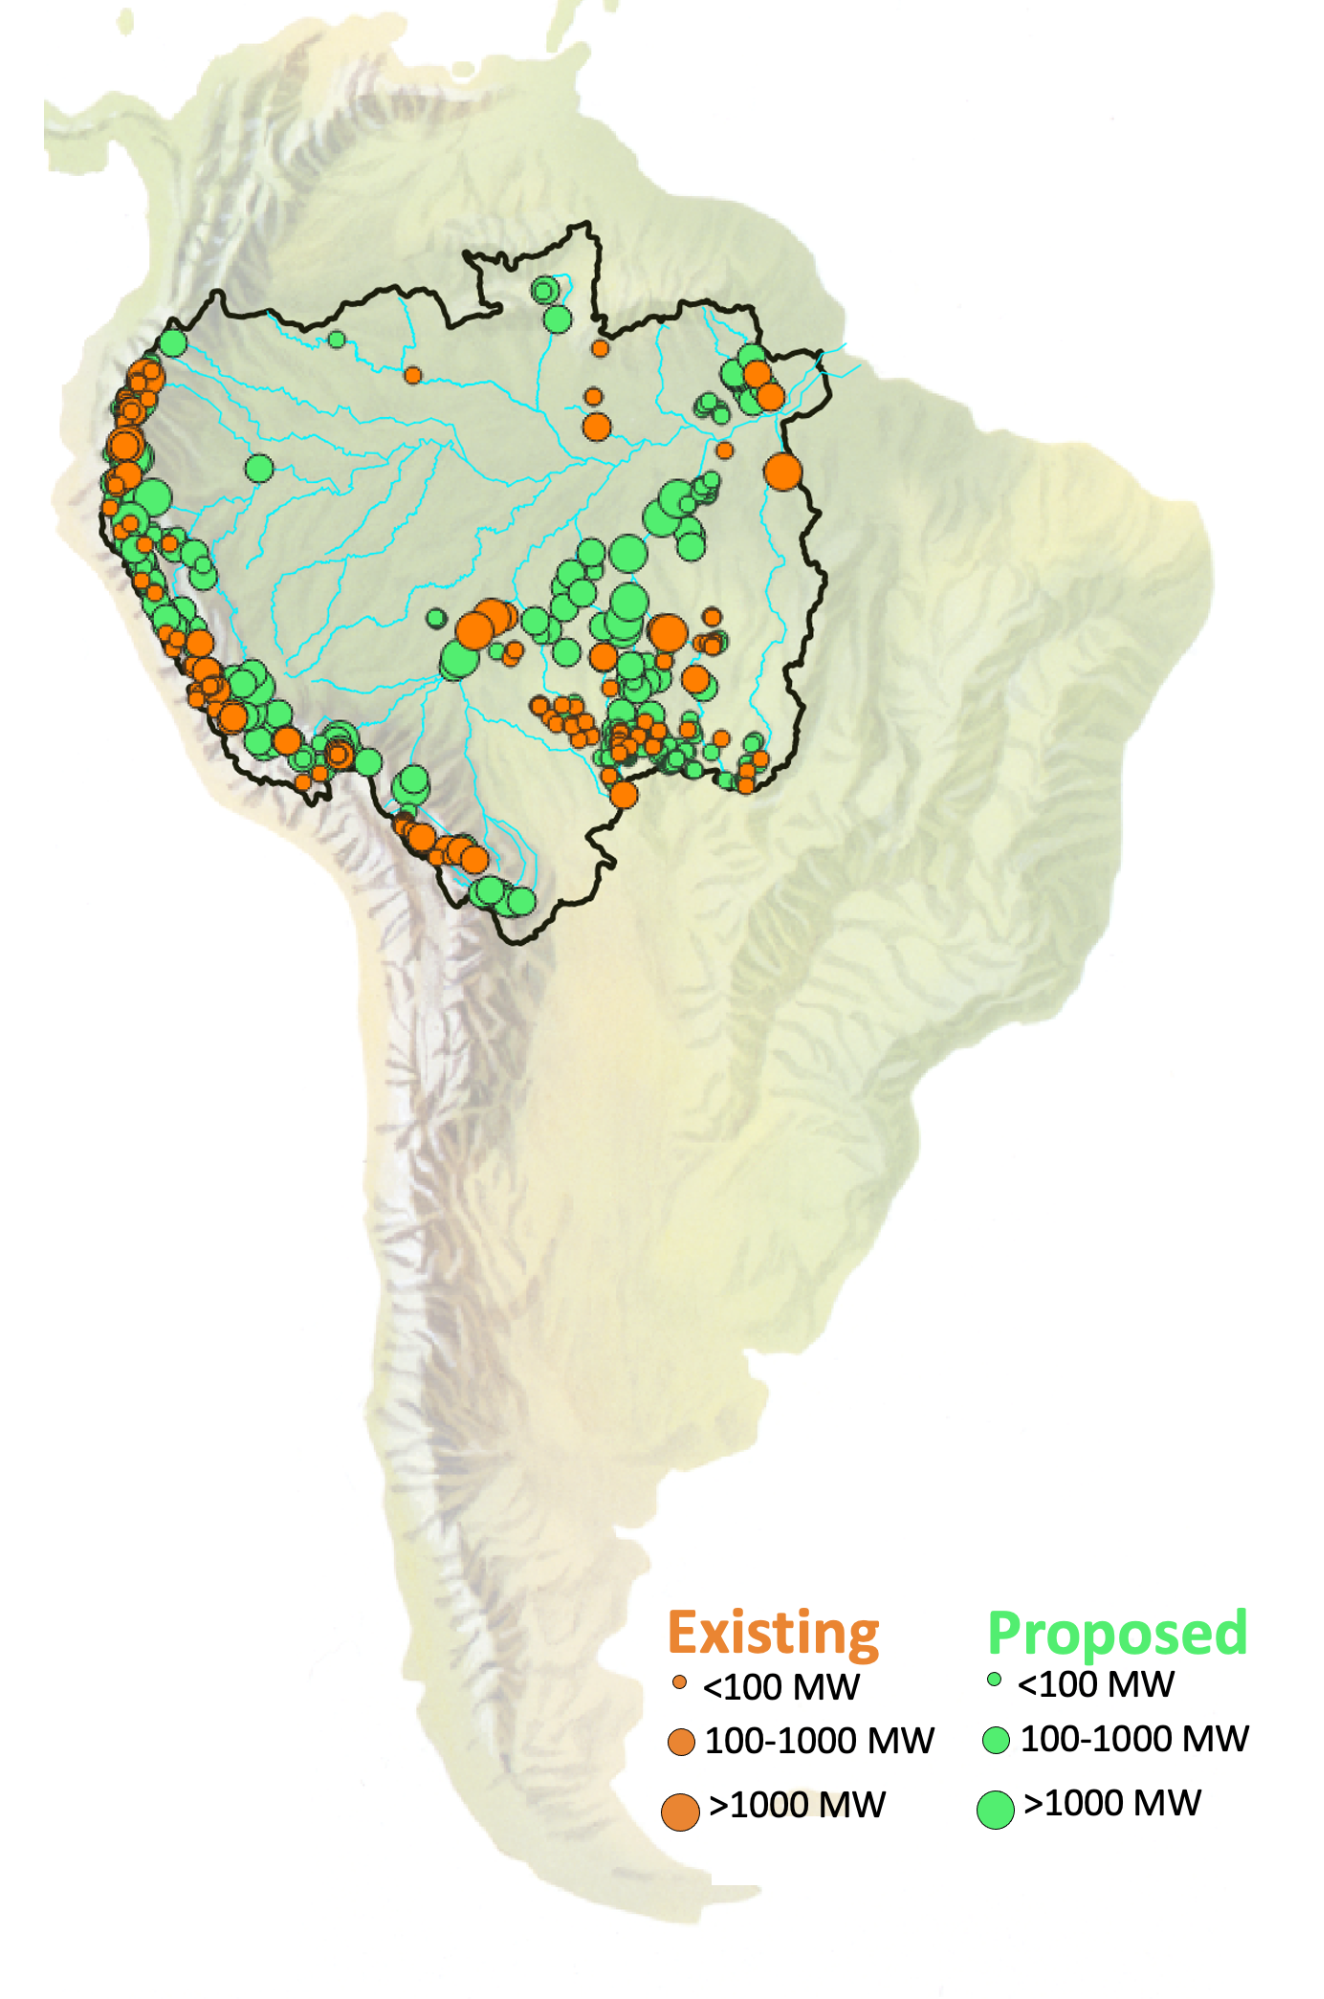 Map of existing and proposed dams in the Amazon basin